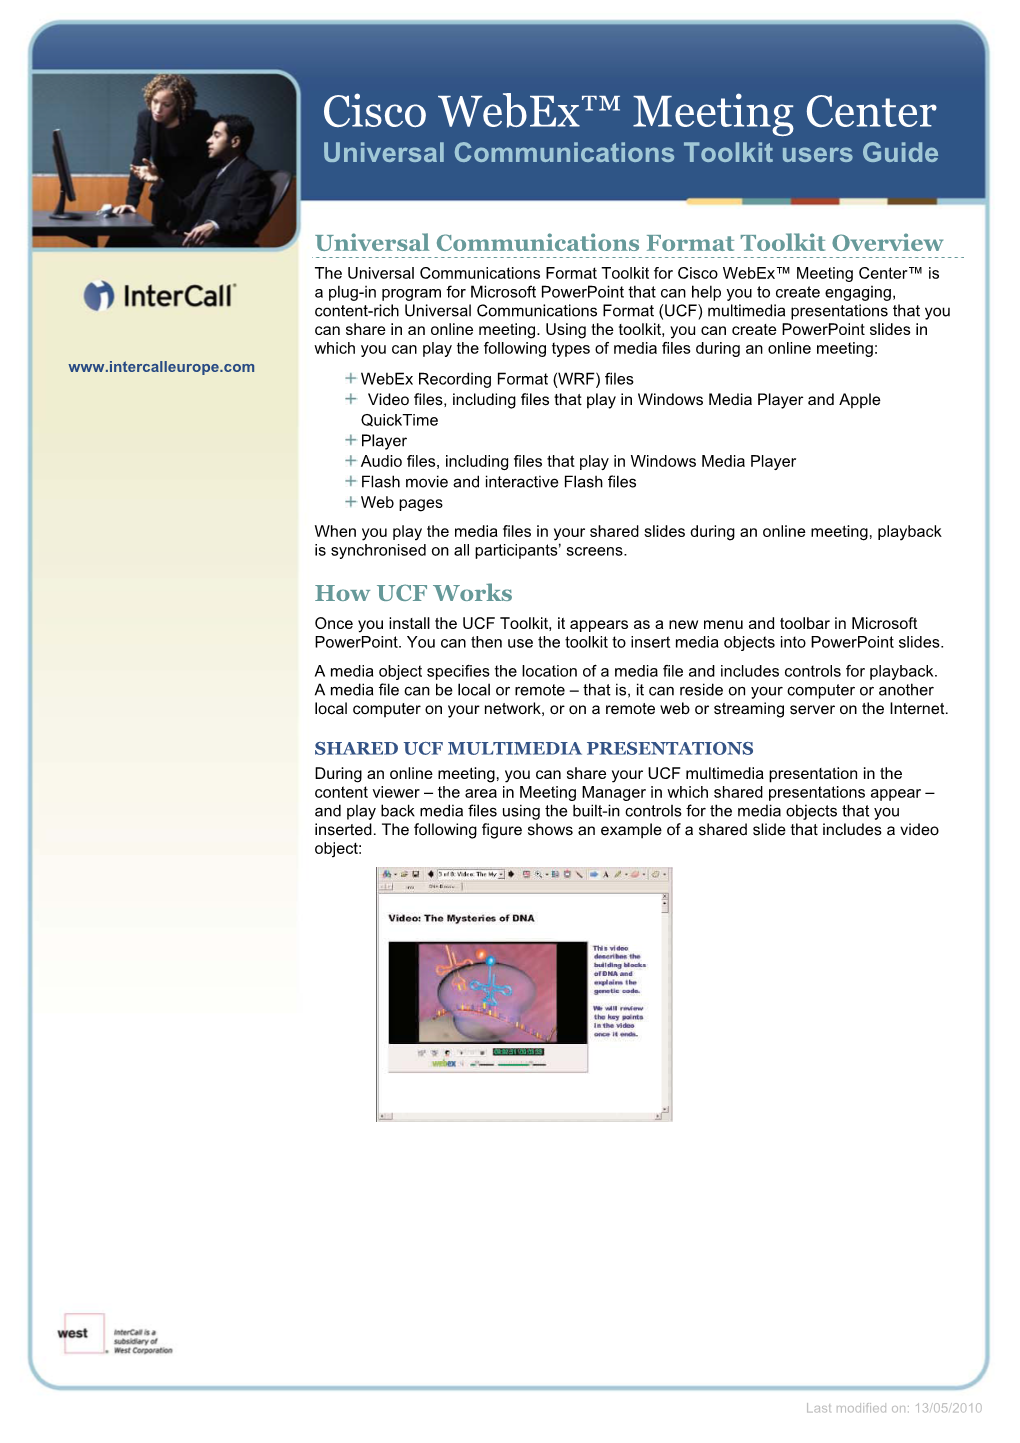 Cisco Webex™ Meeting Center Universal Communications Toolkit Users Guide